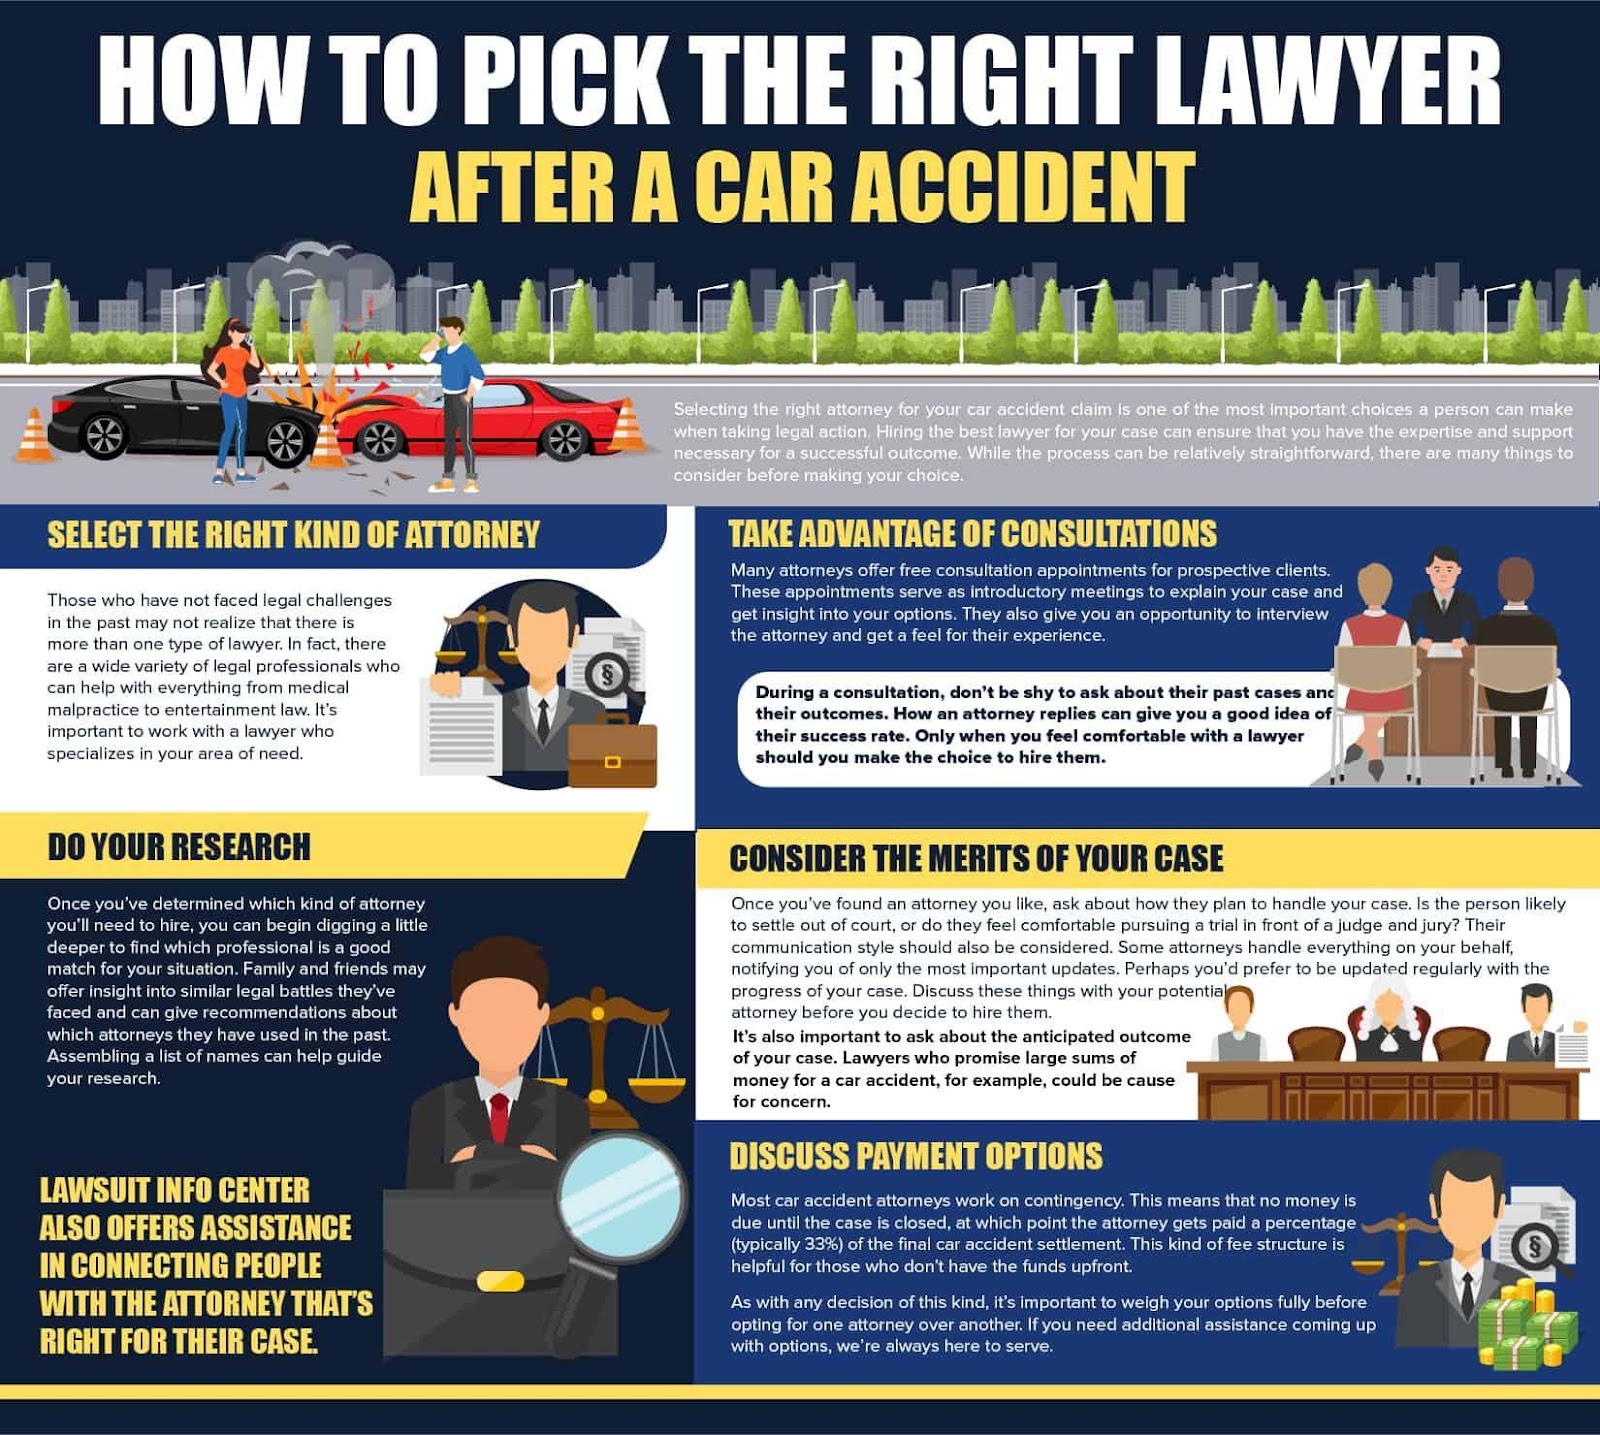 How to Appointment Car Accident Lawyers near Me: Expert Tips for Choosing the Best